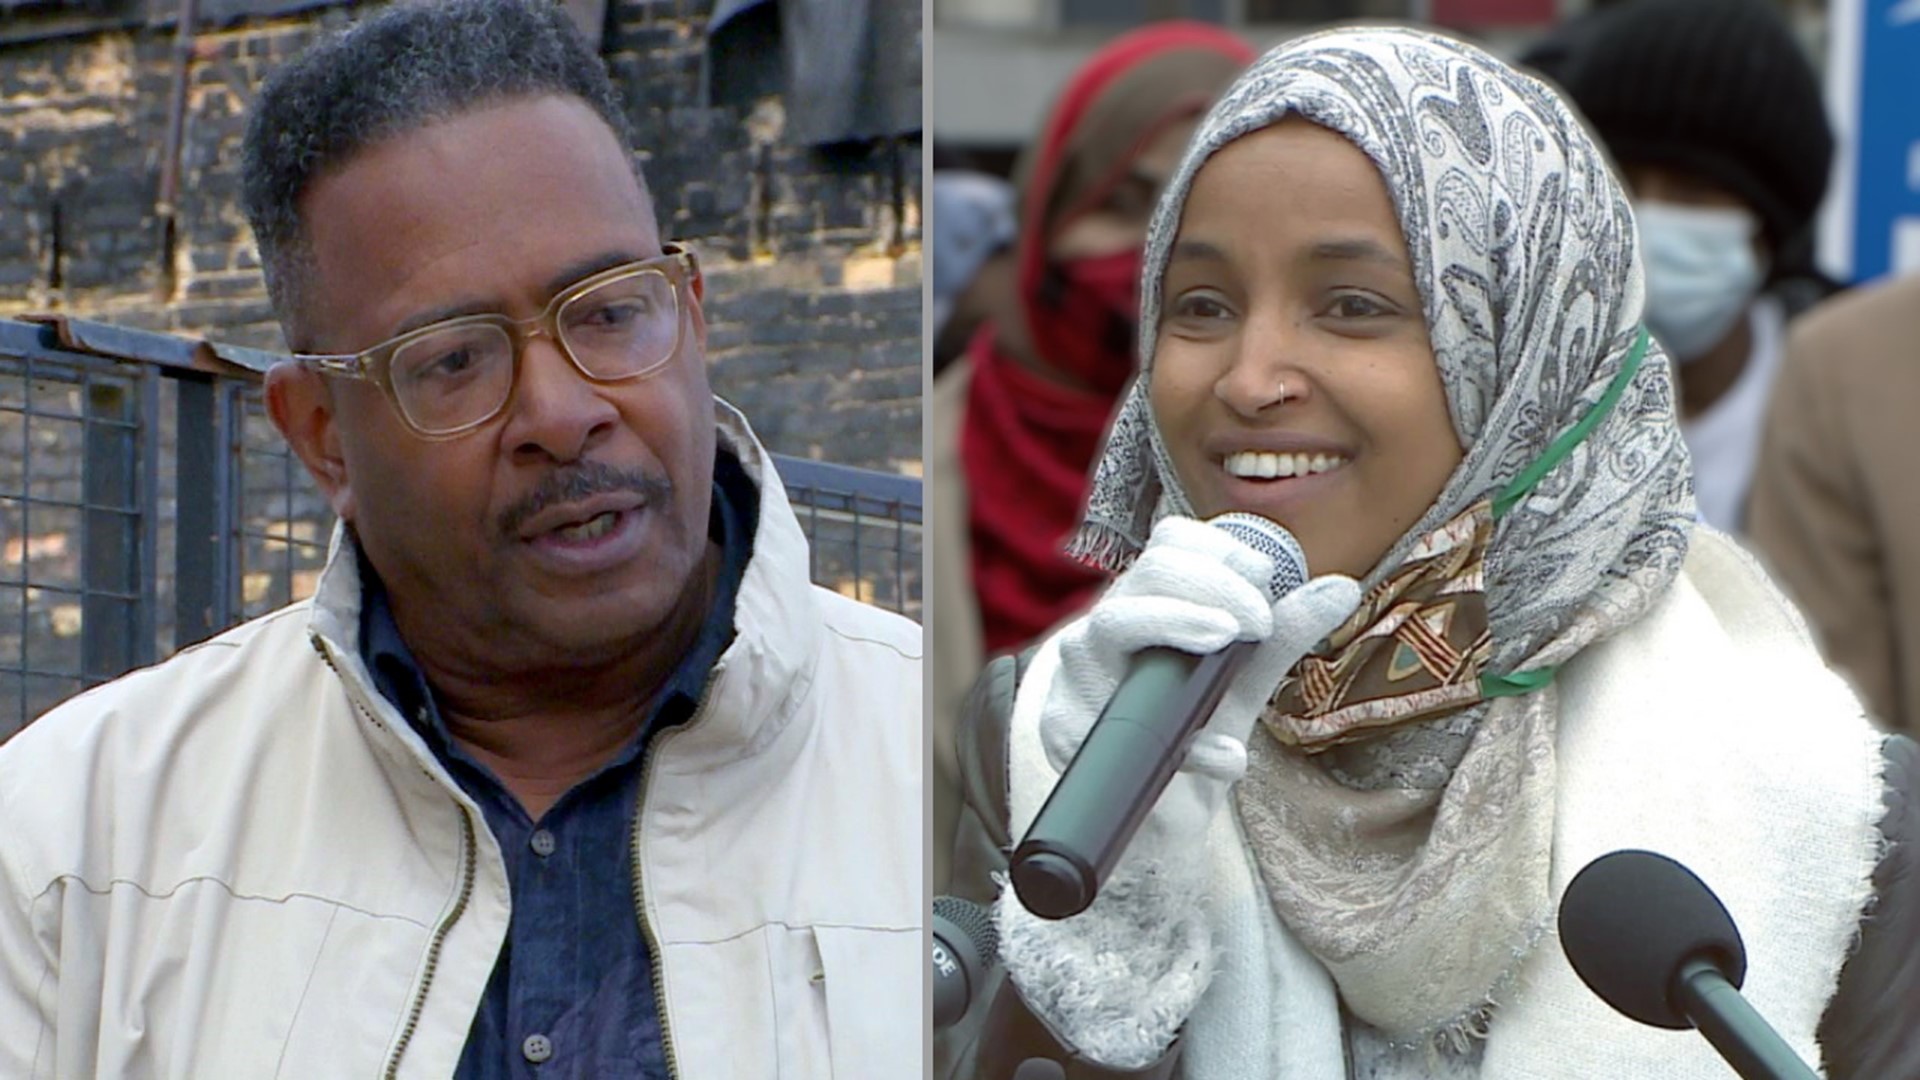 Democratic incumbent Ilhan Omar is up against Republican challenger Lacy Johnson.